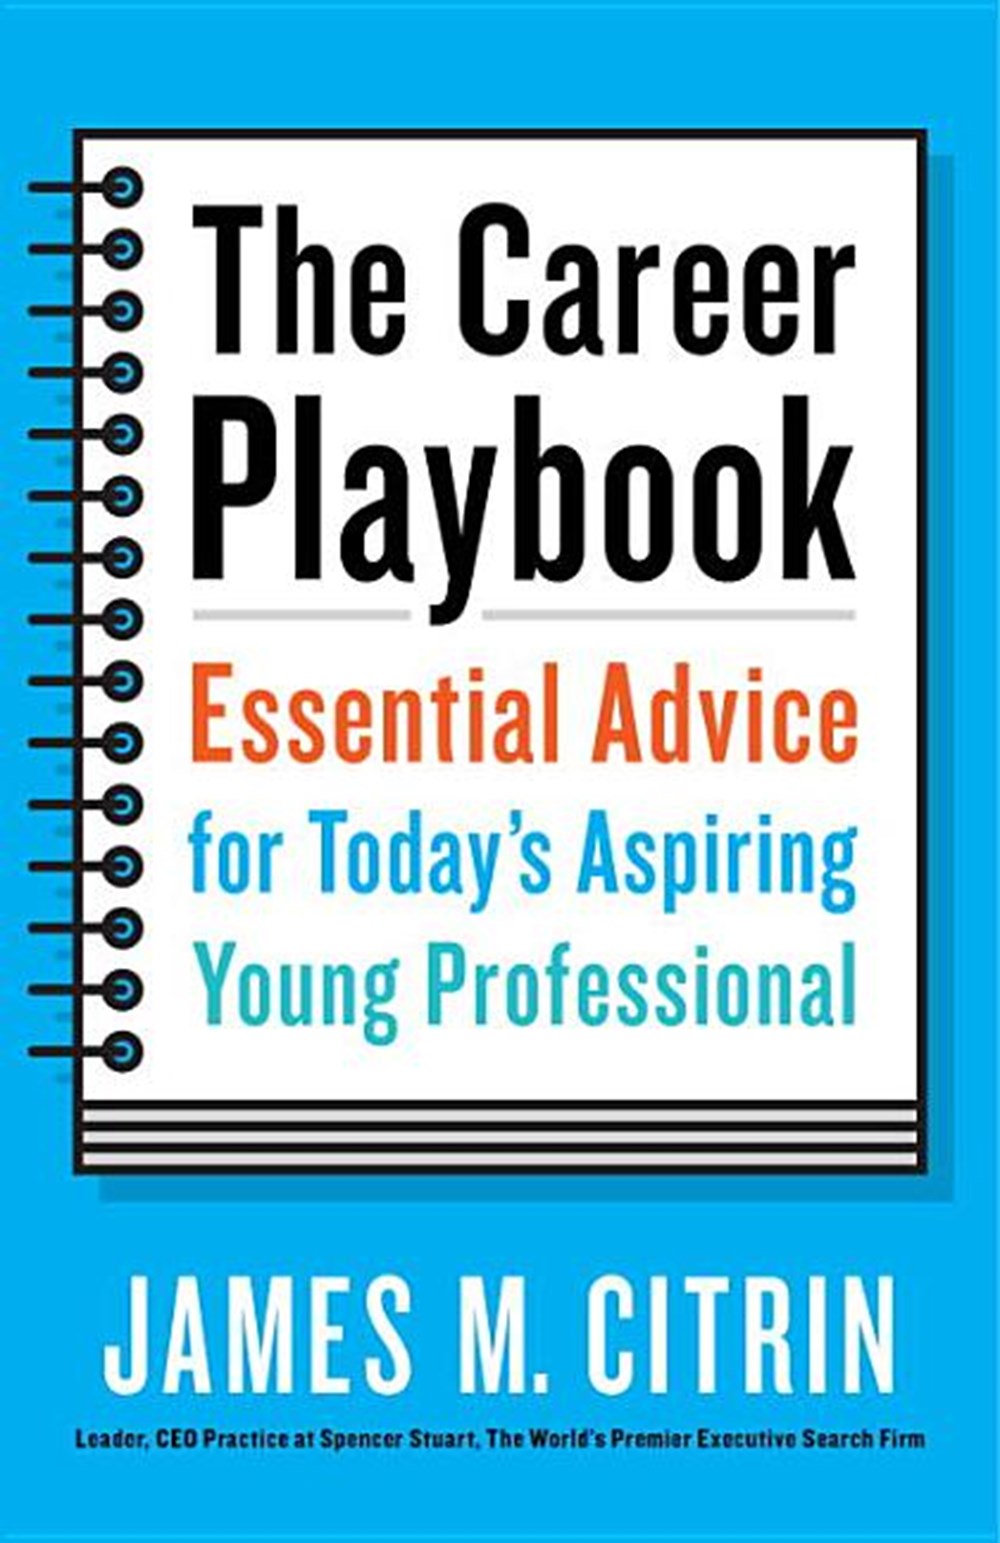 Career Playbook Essential Advice for Today's Aspiring Young Professional